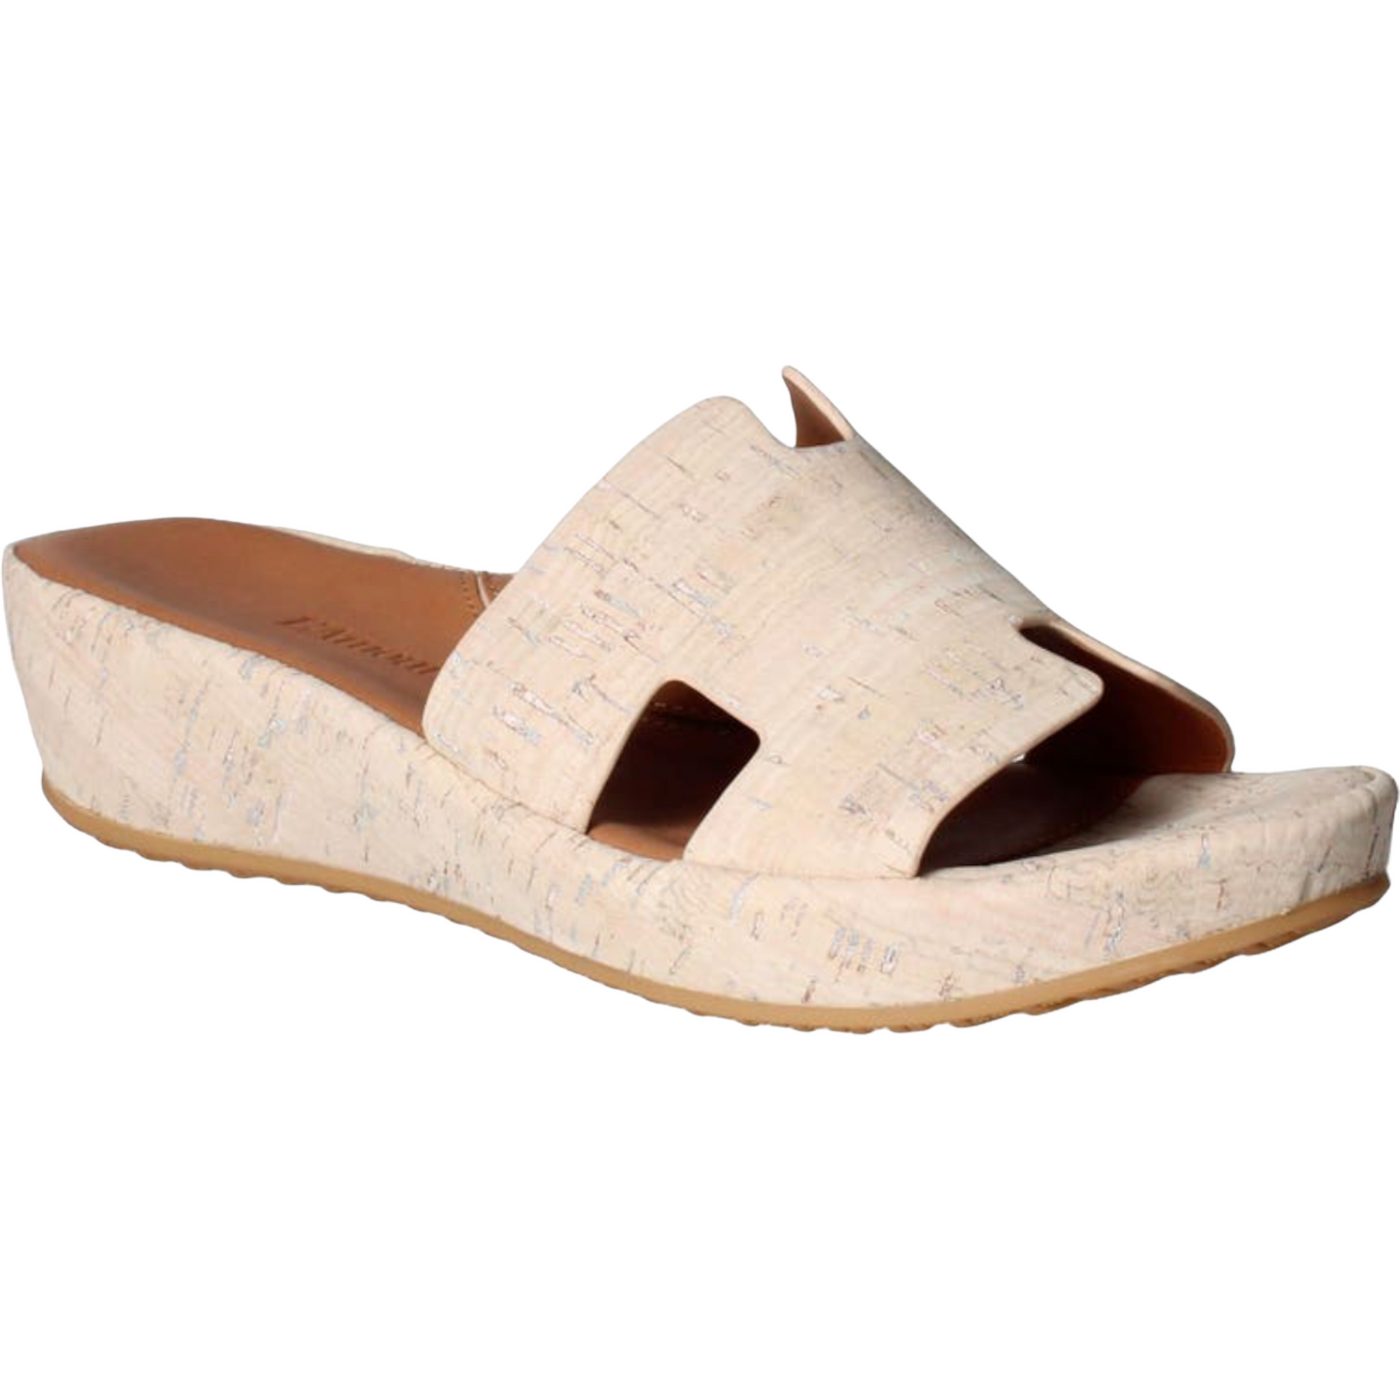 L'amour Des Pieds Catiana in White Wash Cork